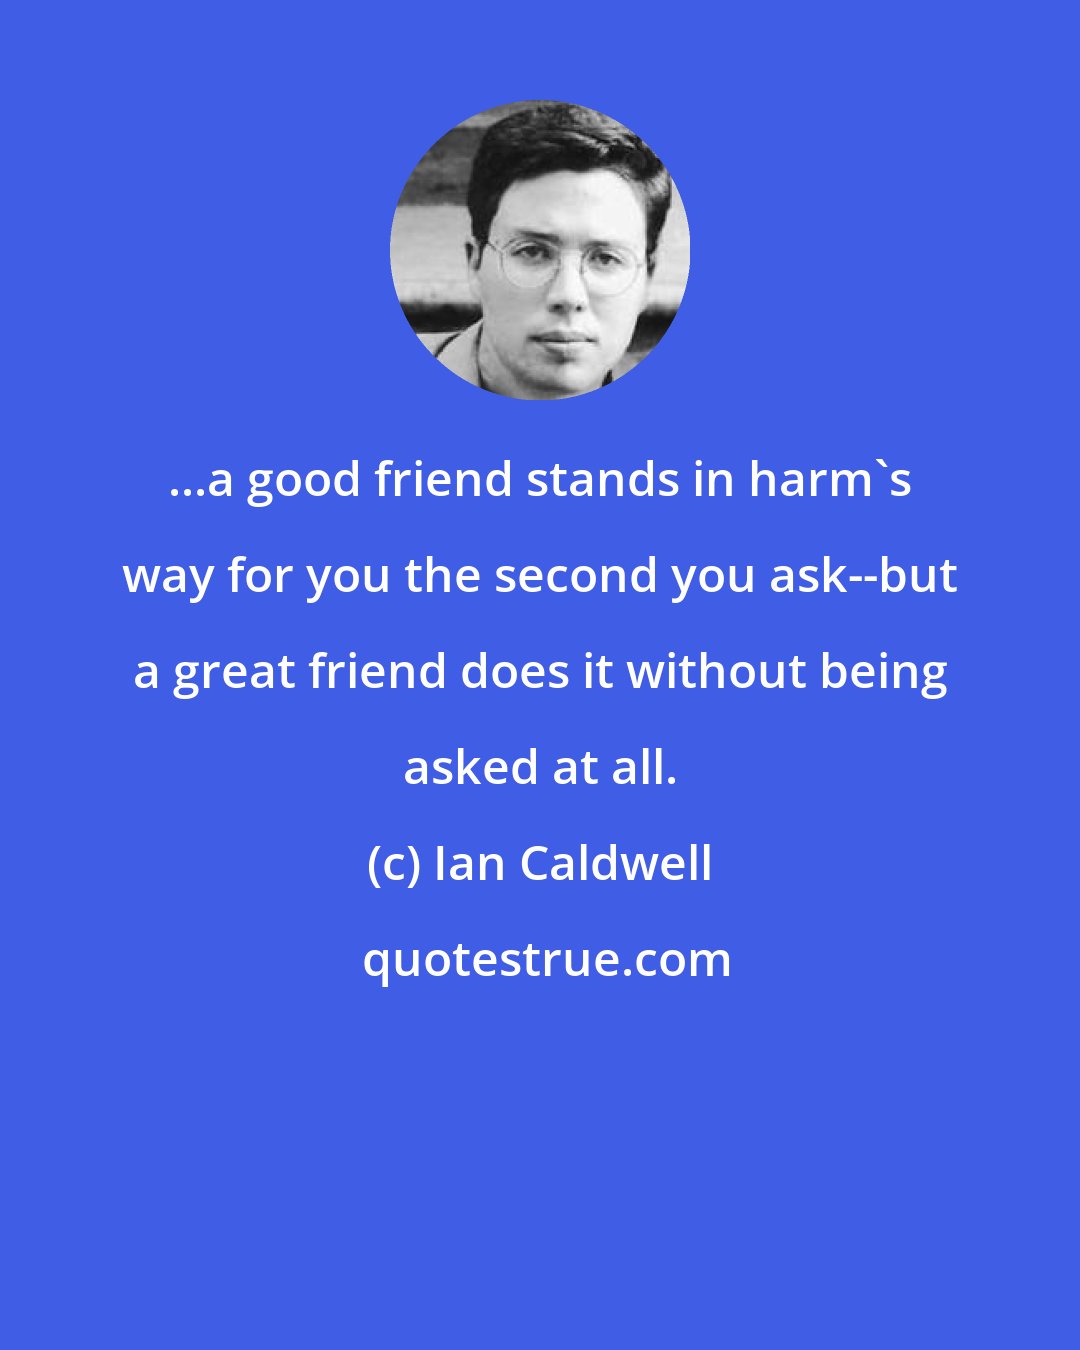 Ian Caldwell: ...a good friend stands in harm's way for you the second you ask--but a great friend does it without being asked at all.